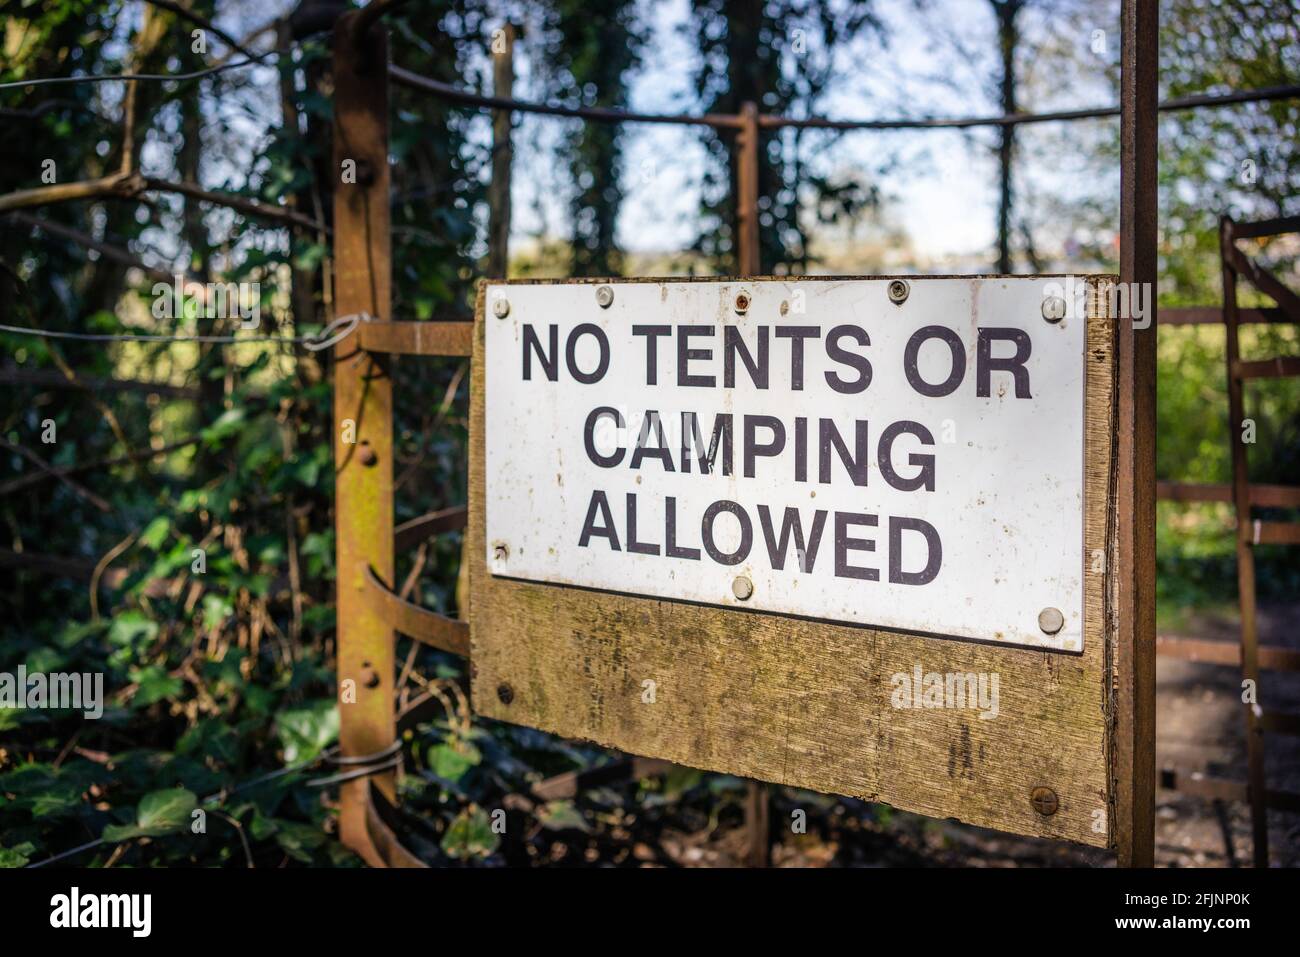 No Tents or Camping allowed sign, Totton, Southampton, England, UK Stock Photo